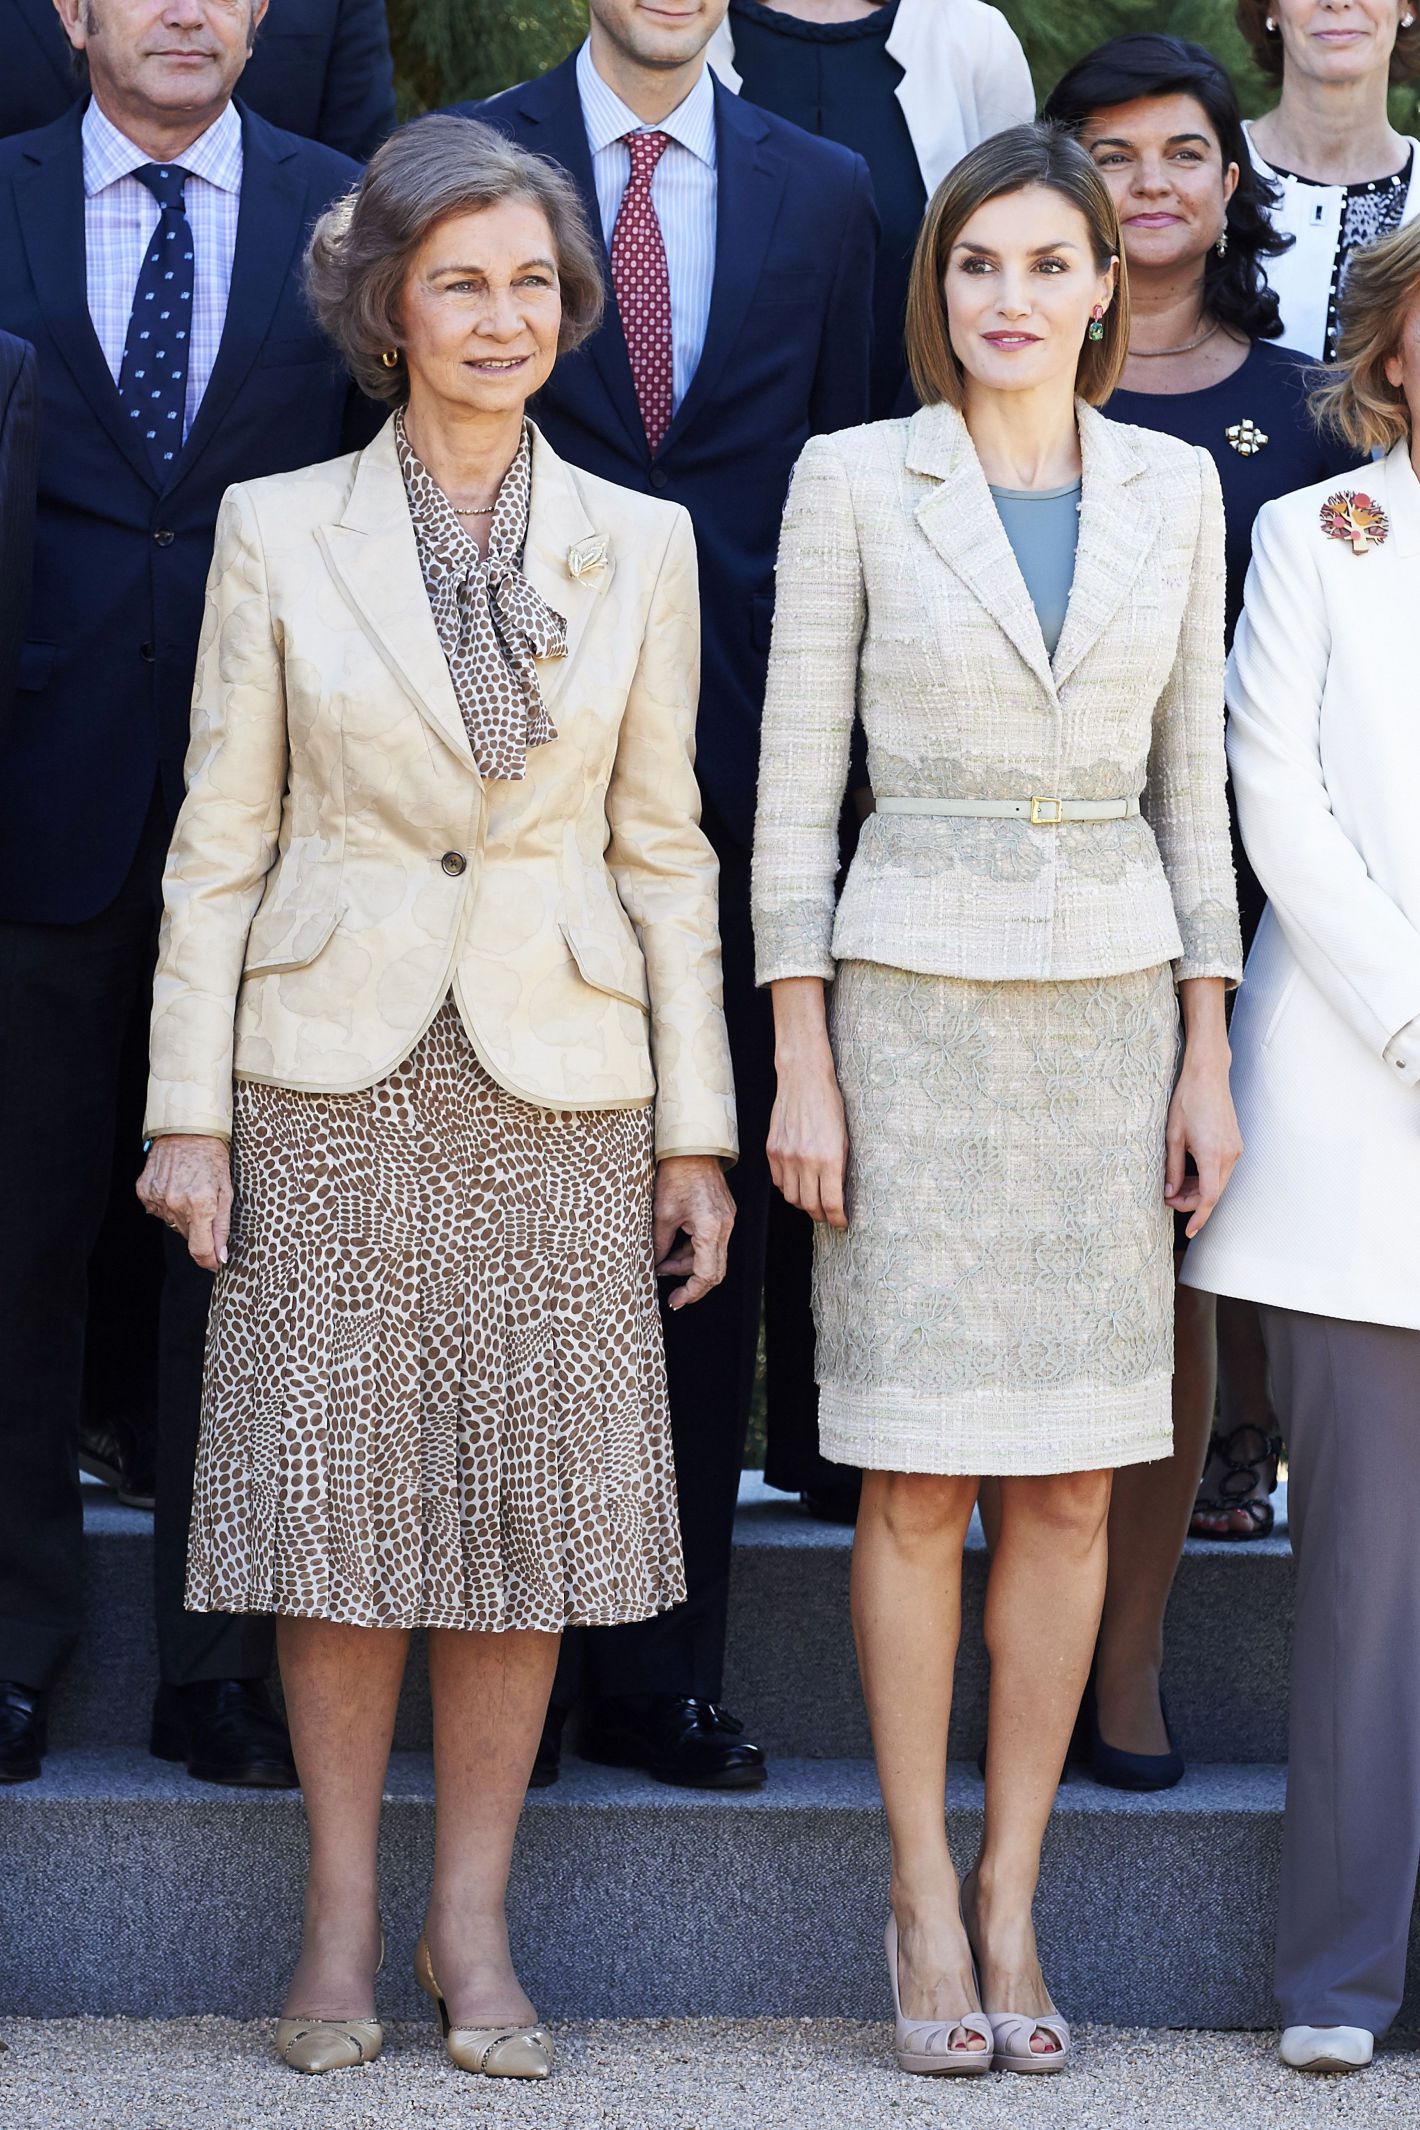 Mandatory Credit: Photo by REX/Shutterstock (5195777e) Queen Letizia and Former Queen Sofia Queen Letizia and Queen Sofia attend audiences in Zarzuela Palace, Madrid, Spain - 29 Sep 2015 Queen Letizia and Queen Sofia of Spain attend an audience with the communication media of FAD (Foundation Against Drug addiction at the Zarzuela Palace